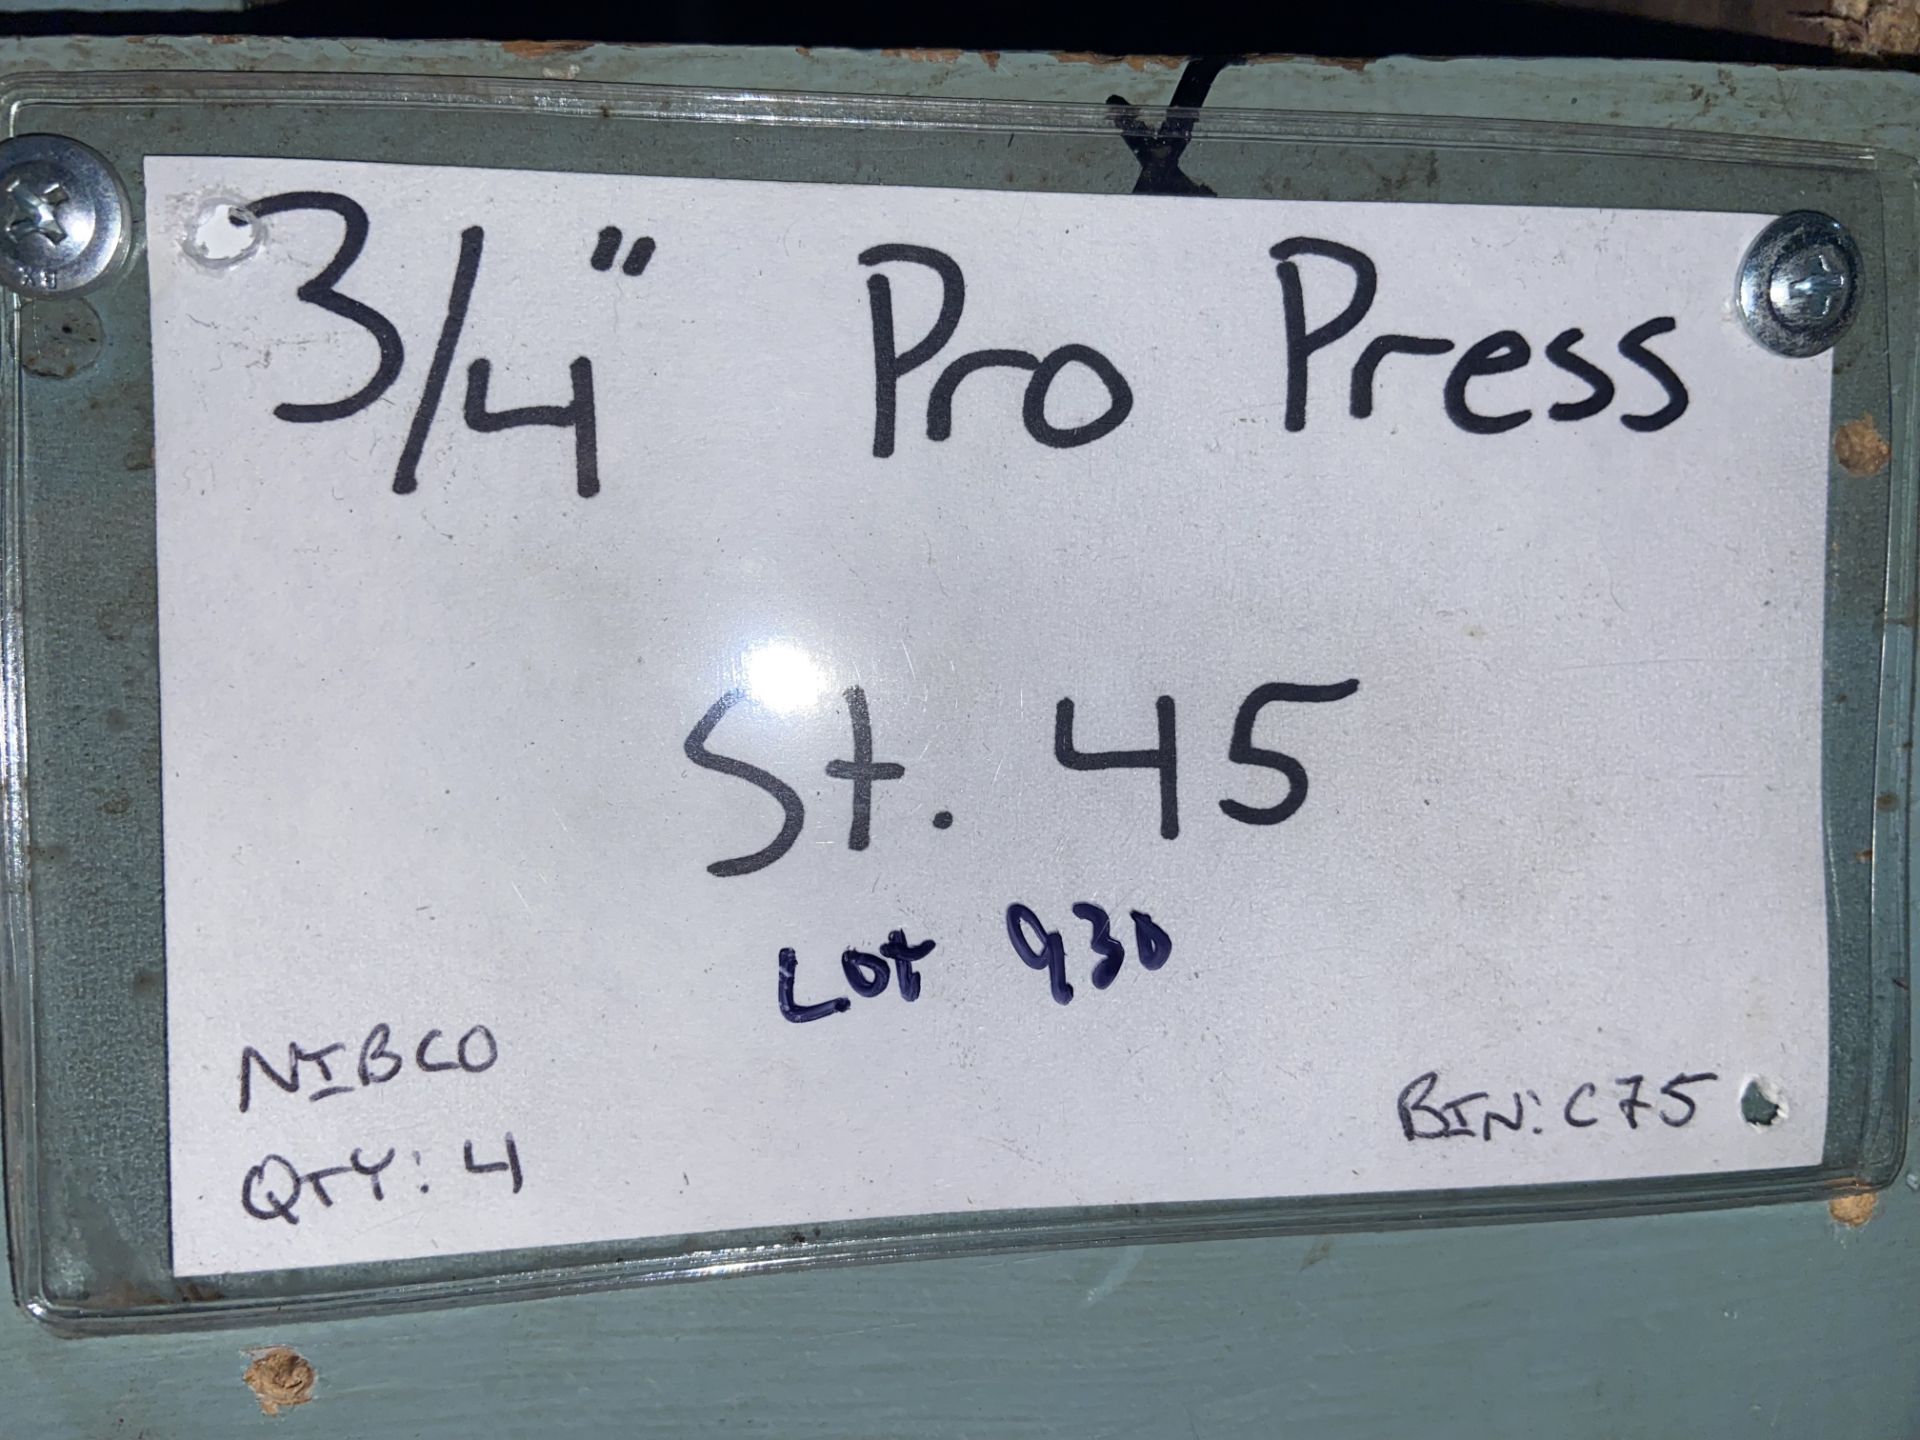 (4) 3/4" Pro Press st. 45 (Bin:C75) (LOCATED IN MONROEVILLE, PA) - Image 2 of 2